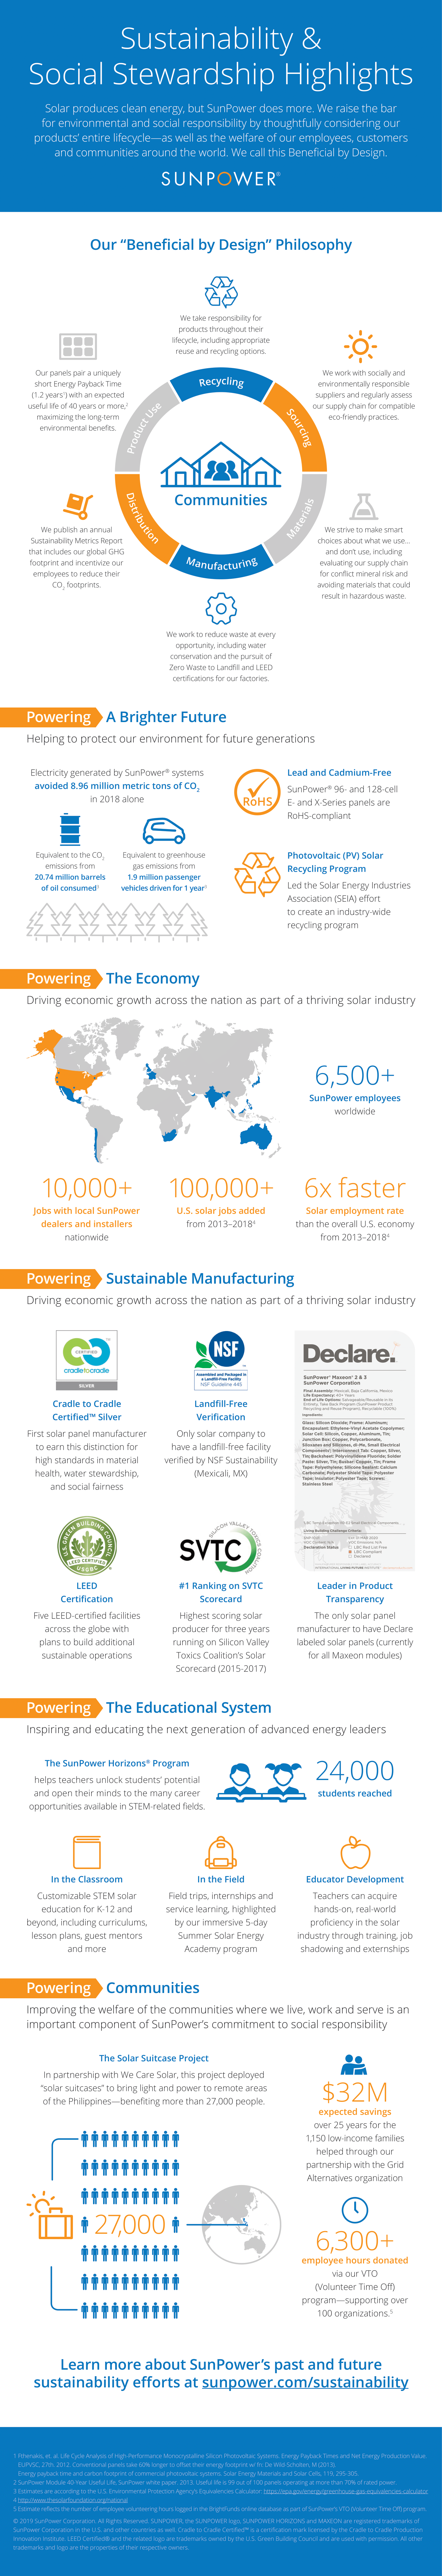 SunPower Corporate Sustainability - 2019-1.png